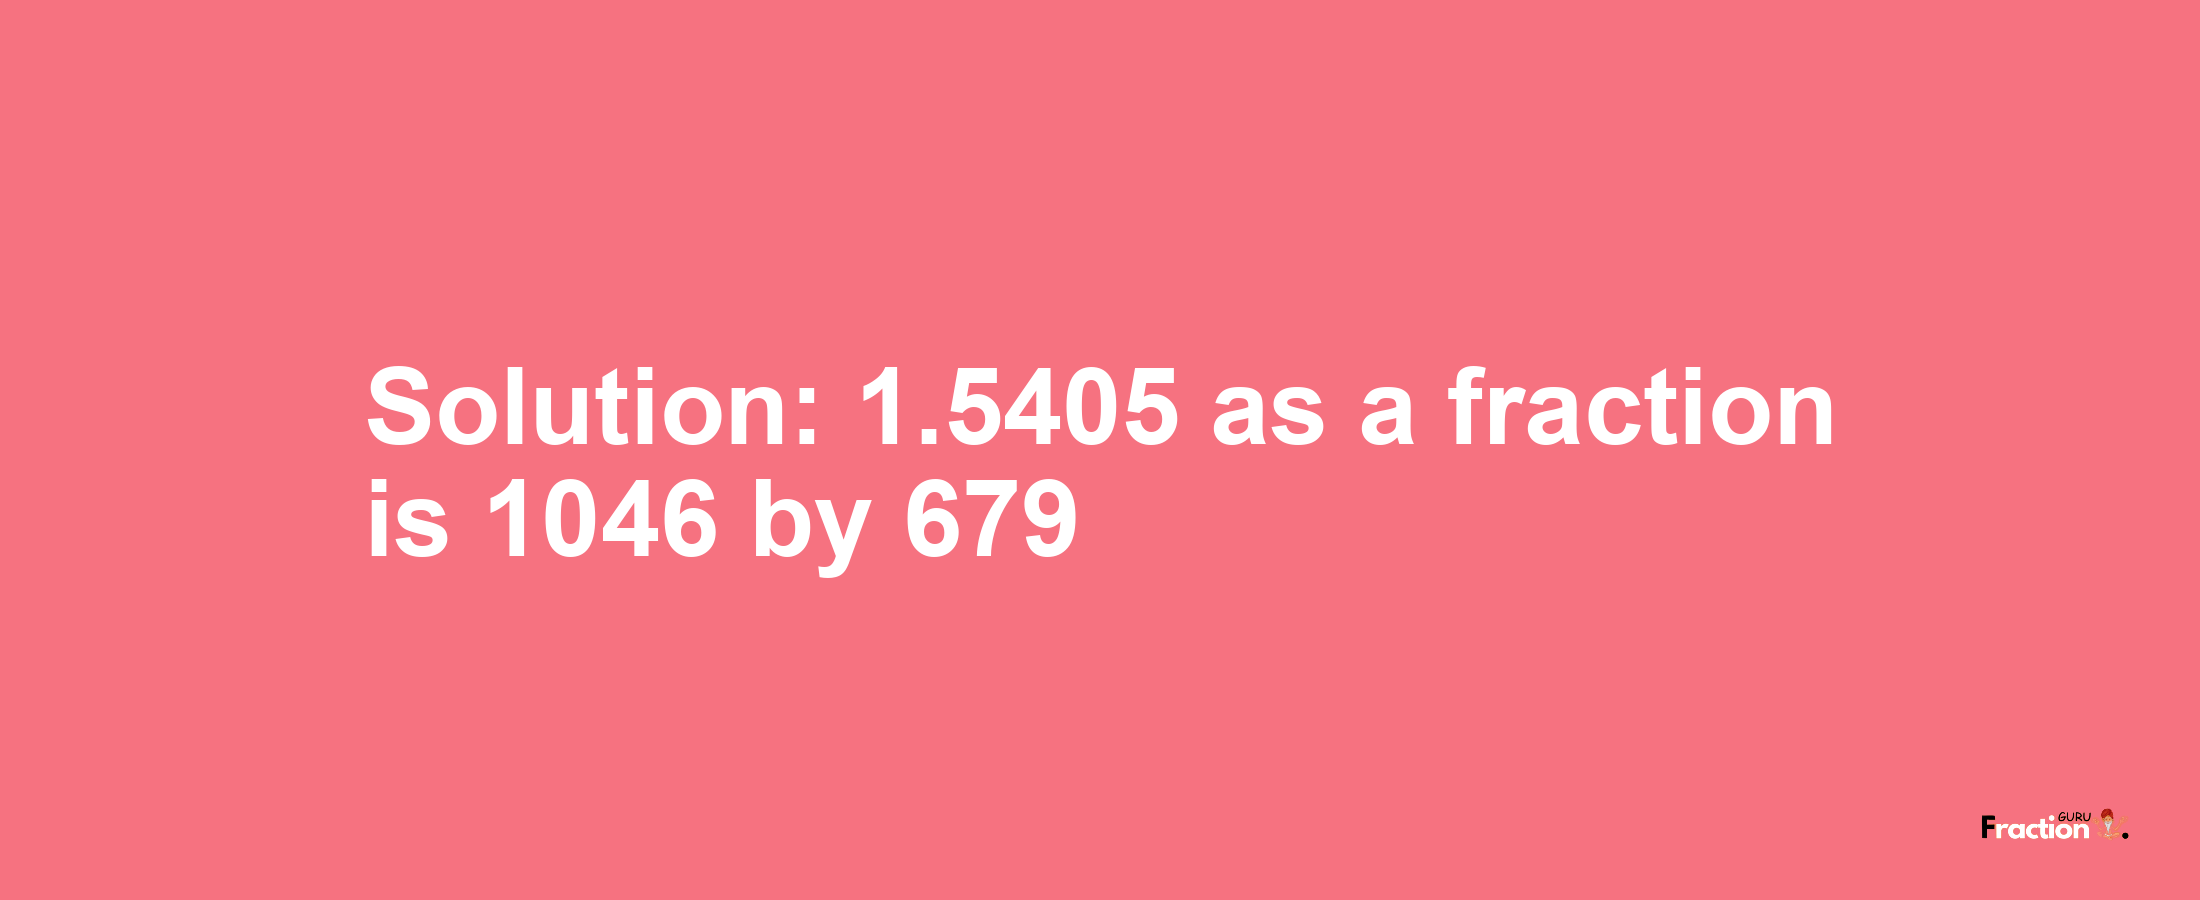 Solution:1.5405 as a fraction is 1046/679